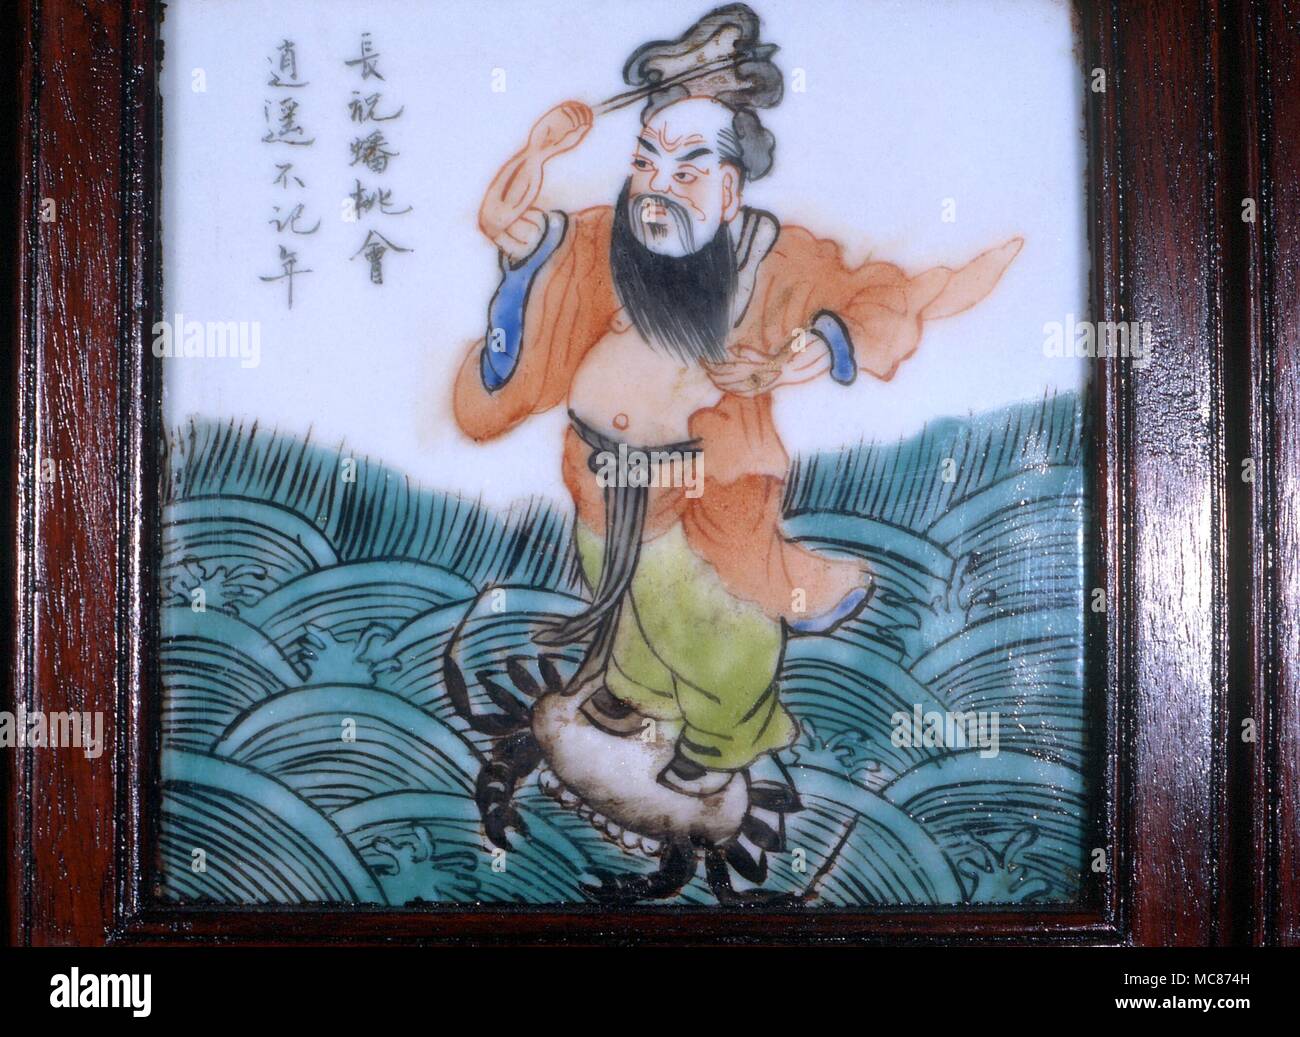 Taoism - One of the Taoist 'Eight Immortals- (Pa Hsien). Chung-li Ch'uan, who discovered the alchemical elixir of life, with his emblem, the fan. Mid-19th century Chinese tile, from a screen Stock Photo